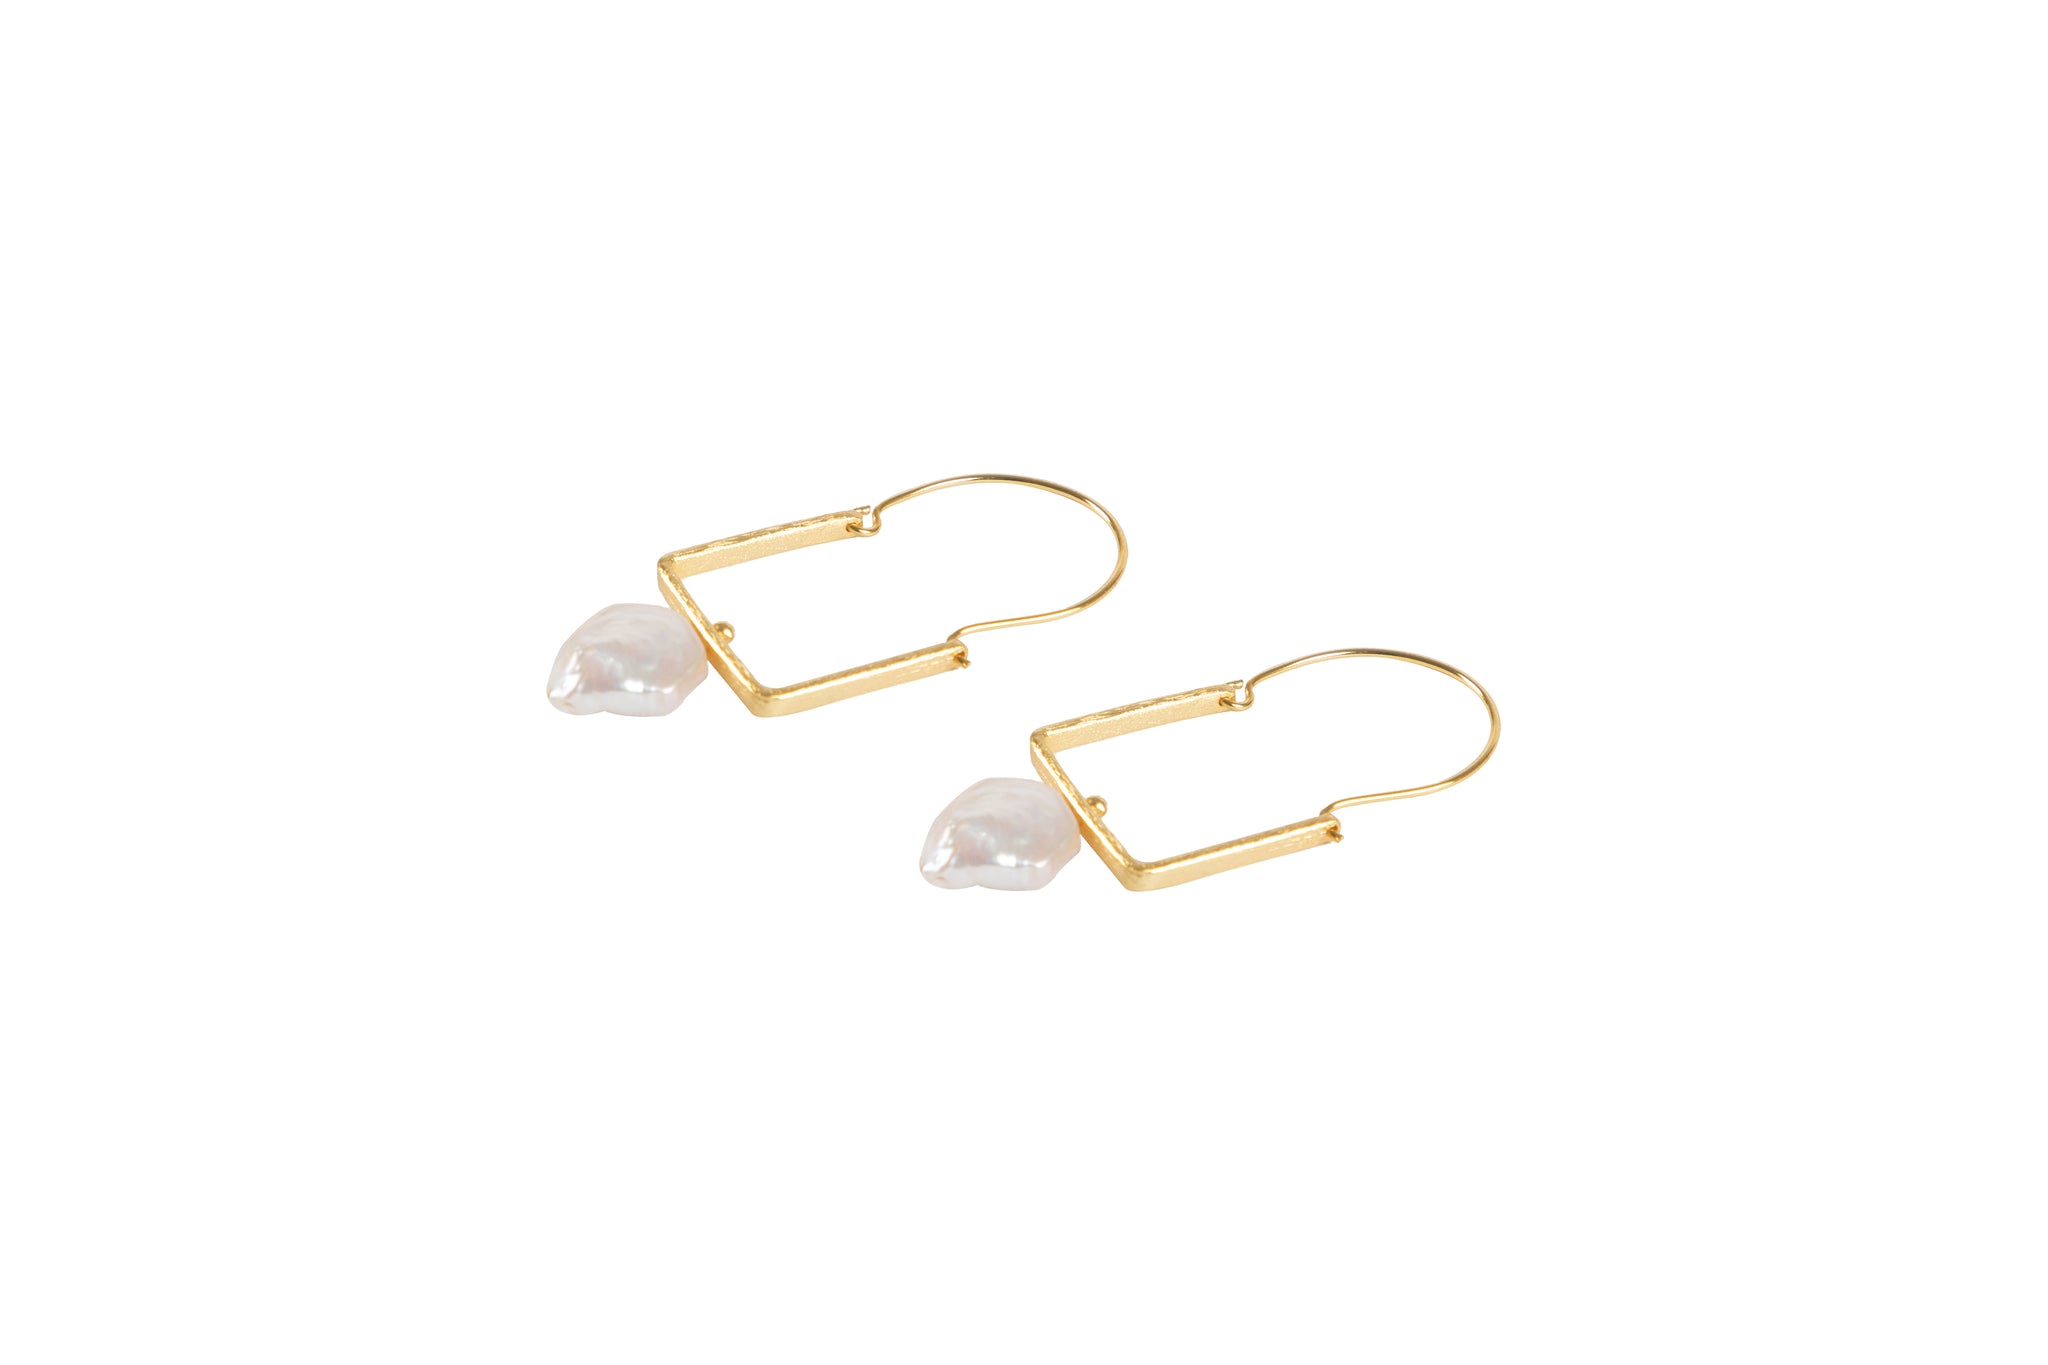 Square Hoops with Baroque Pearl, Gold tone. Handmade